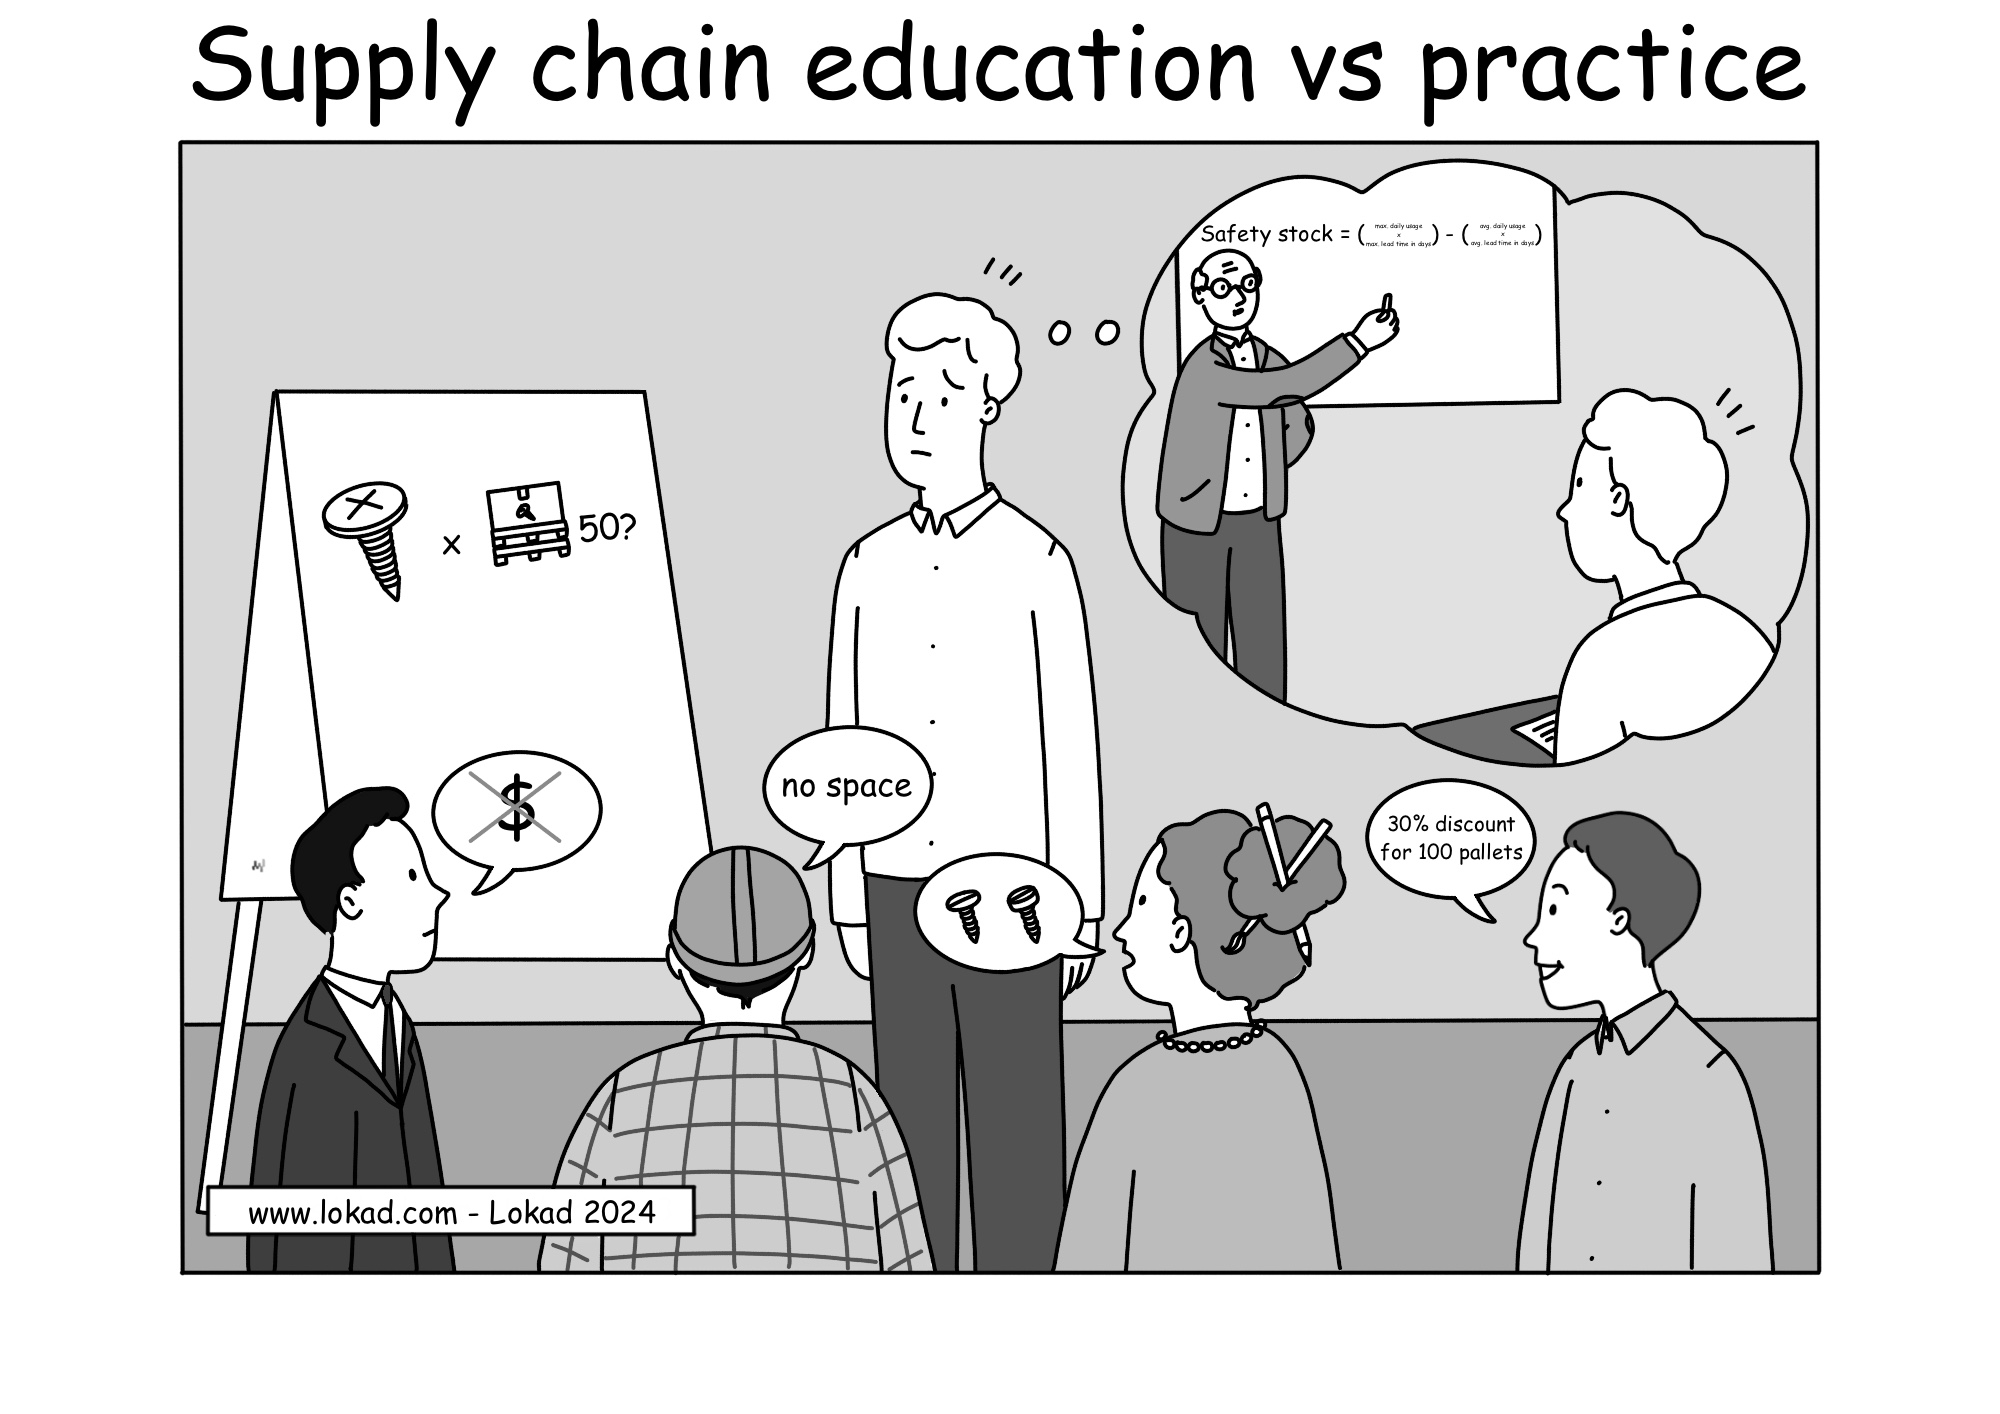 Supply chain education vs practice.